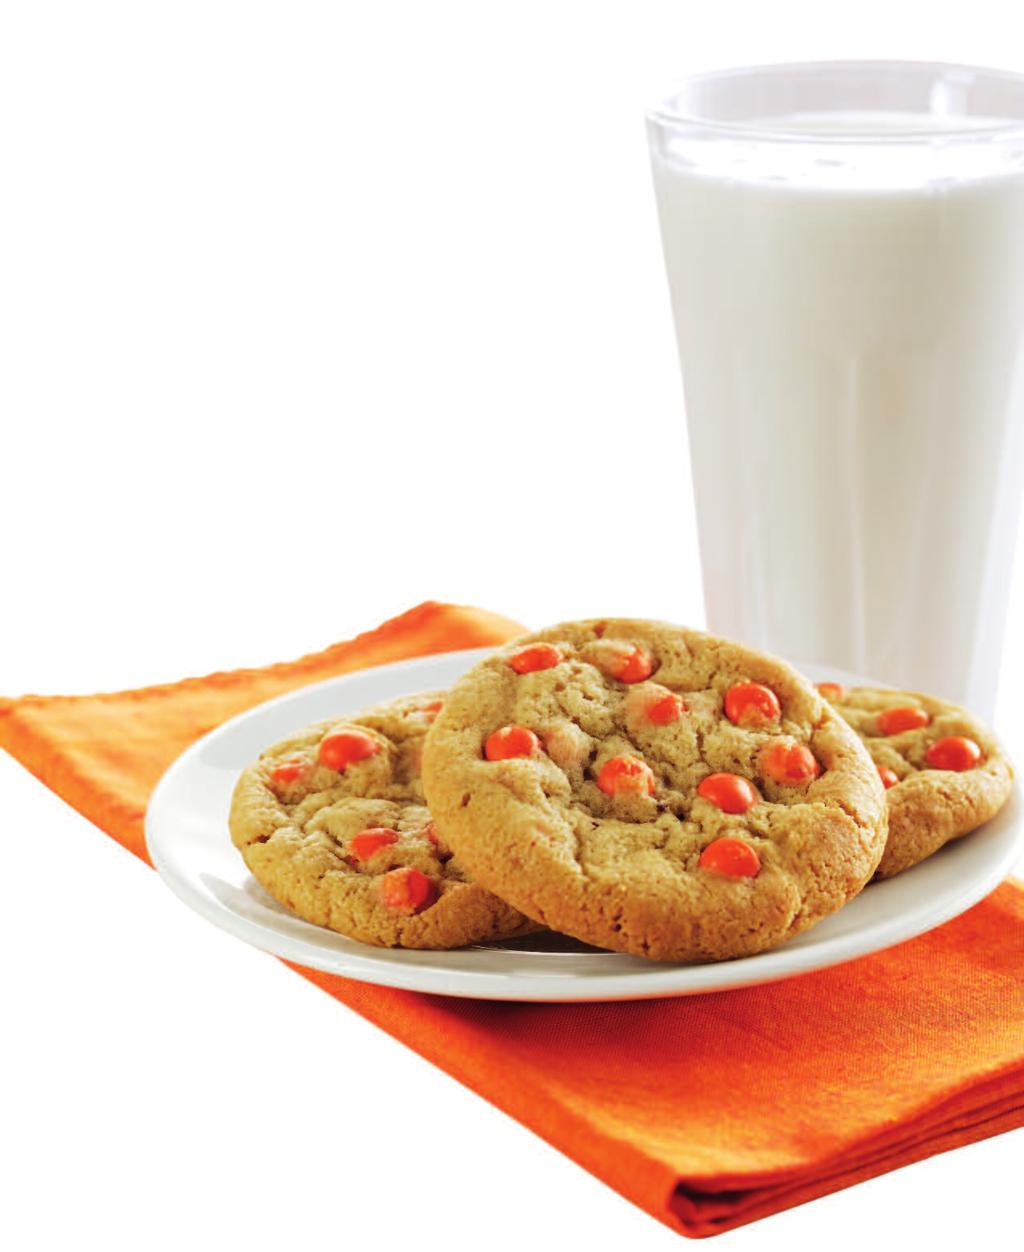 The Orange Cookie Otis Spunkmeyer proudly supports Share Our Strength s No Kid Hungry campaign to end childhood hunger in America.